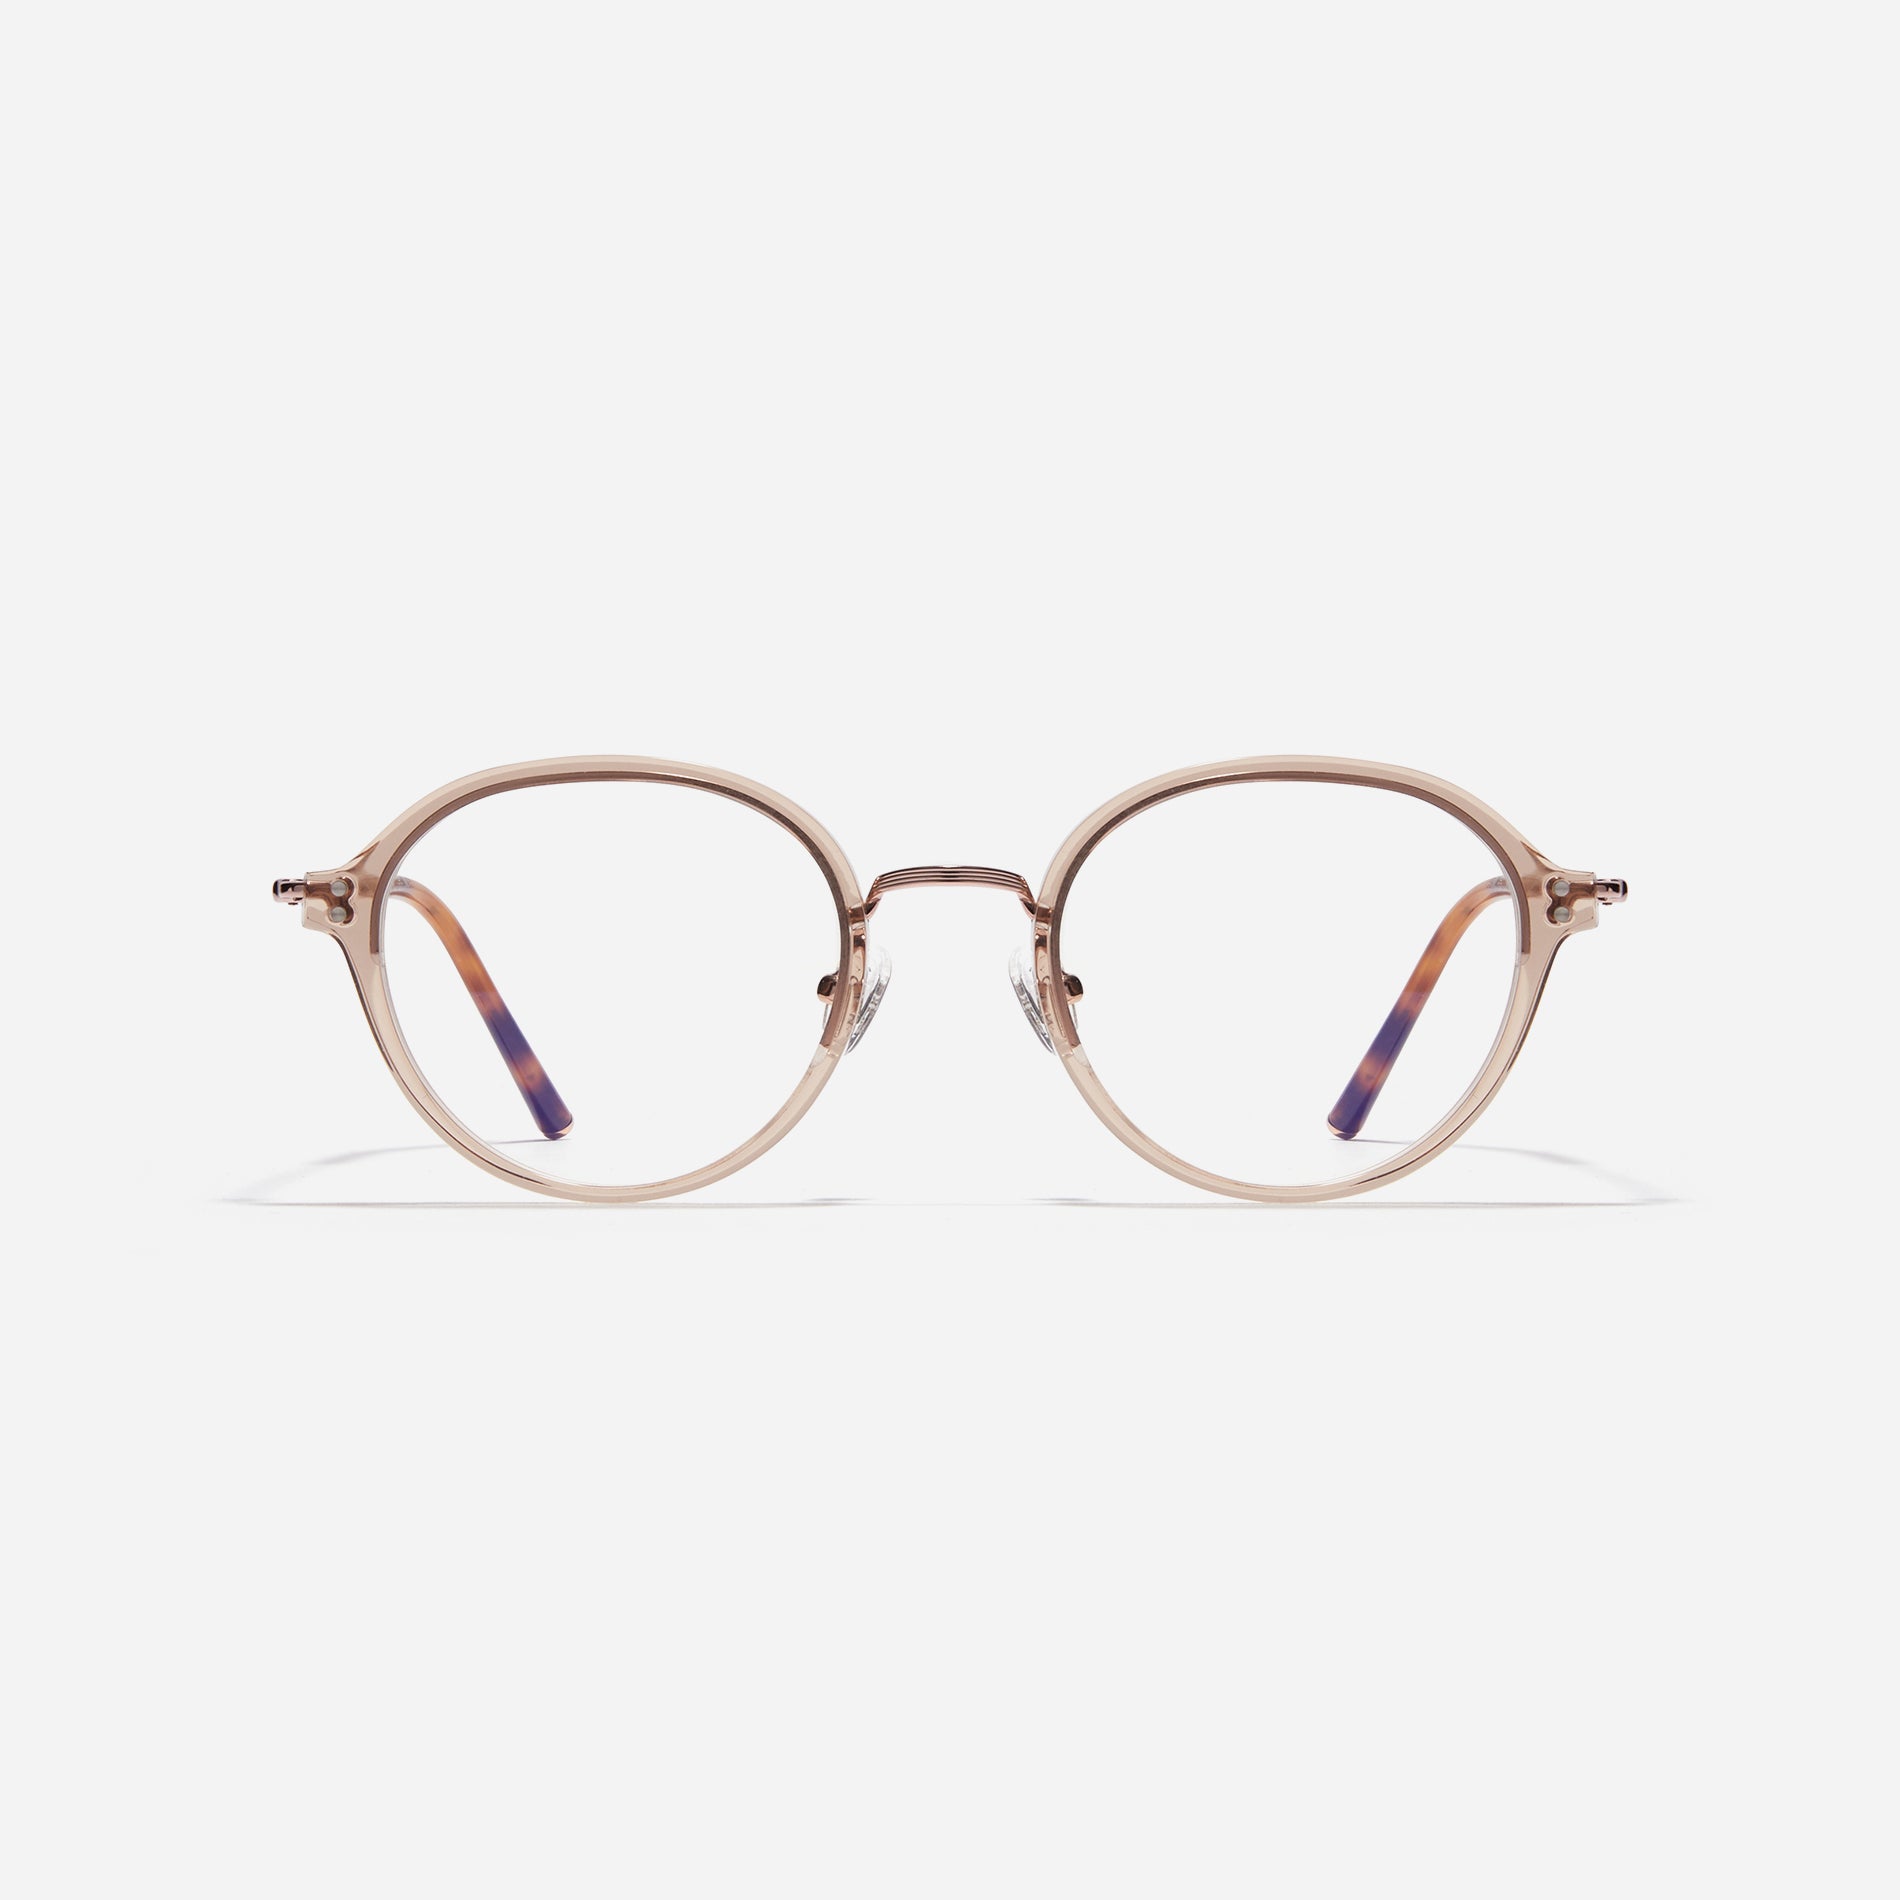 Round-shaped eyeglasses with a dual-combi structure inspired by from the aesthetics of platform shoes. Their dual-rim structure seamlessly accommodates thick lenses for higher prescriptions, while retro vibes are accentuated by side color accents.